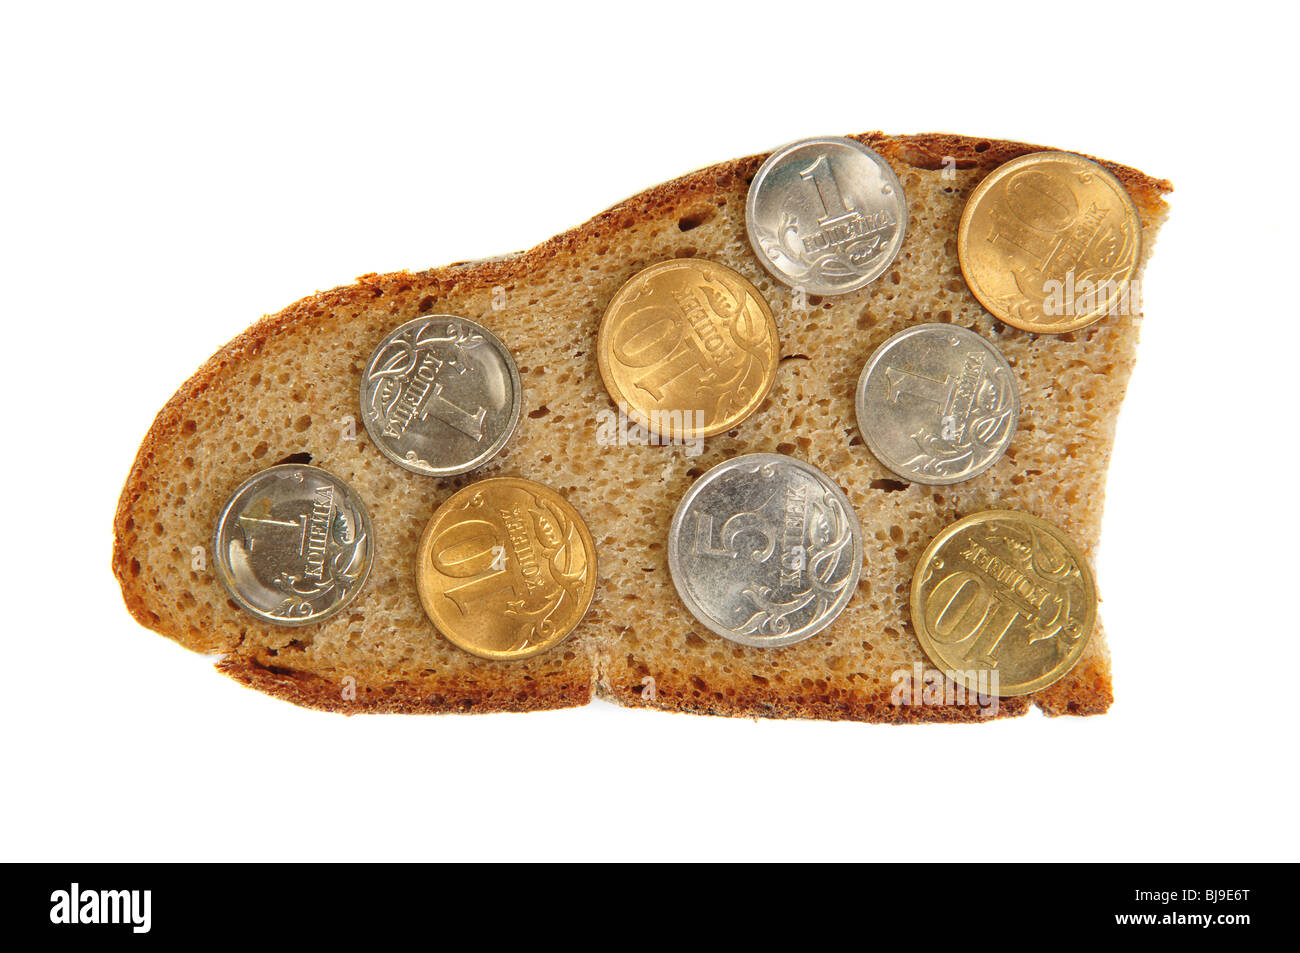 Coins on rye bread slice. Isolated over white Stock Photo